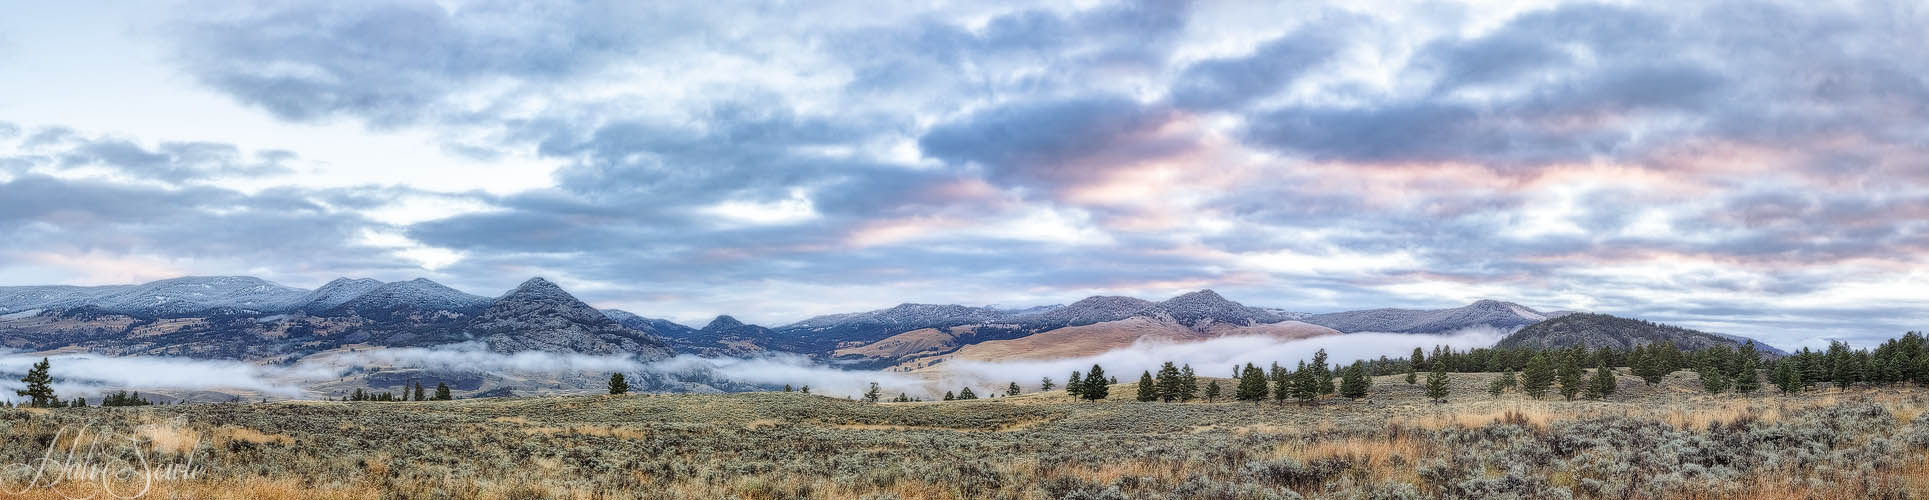 2015_09_18_Yellowstone-10019-HDR-Pano-Edit1000.jpg - Another sunrise, like most of the others it wasn't very spectacular.  On the northern portion of the Grand Loop road between Mammoth and Tower Junction.